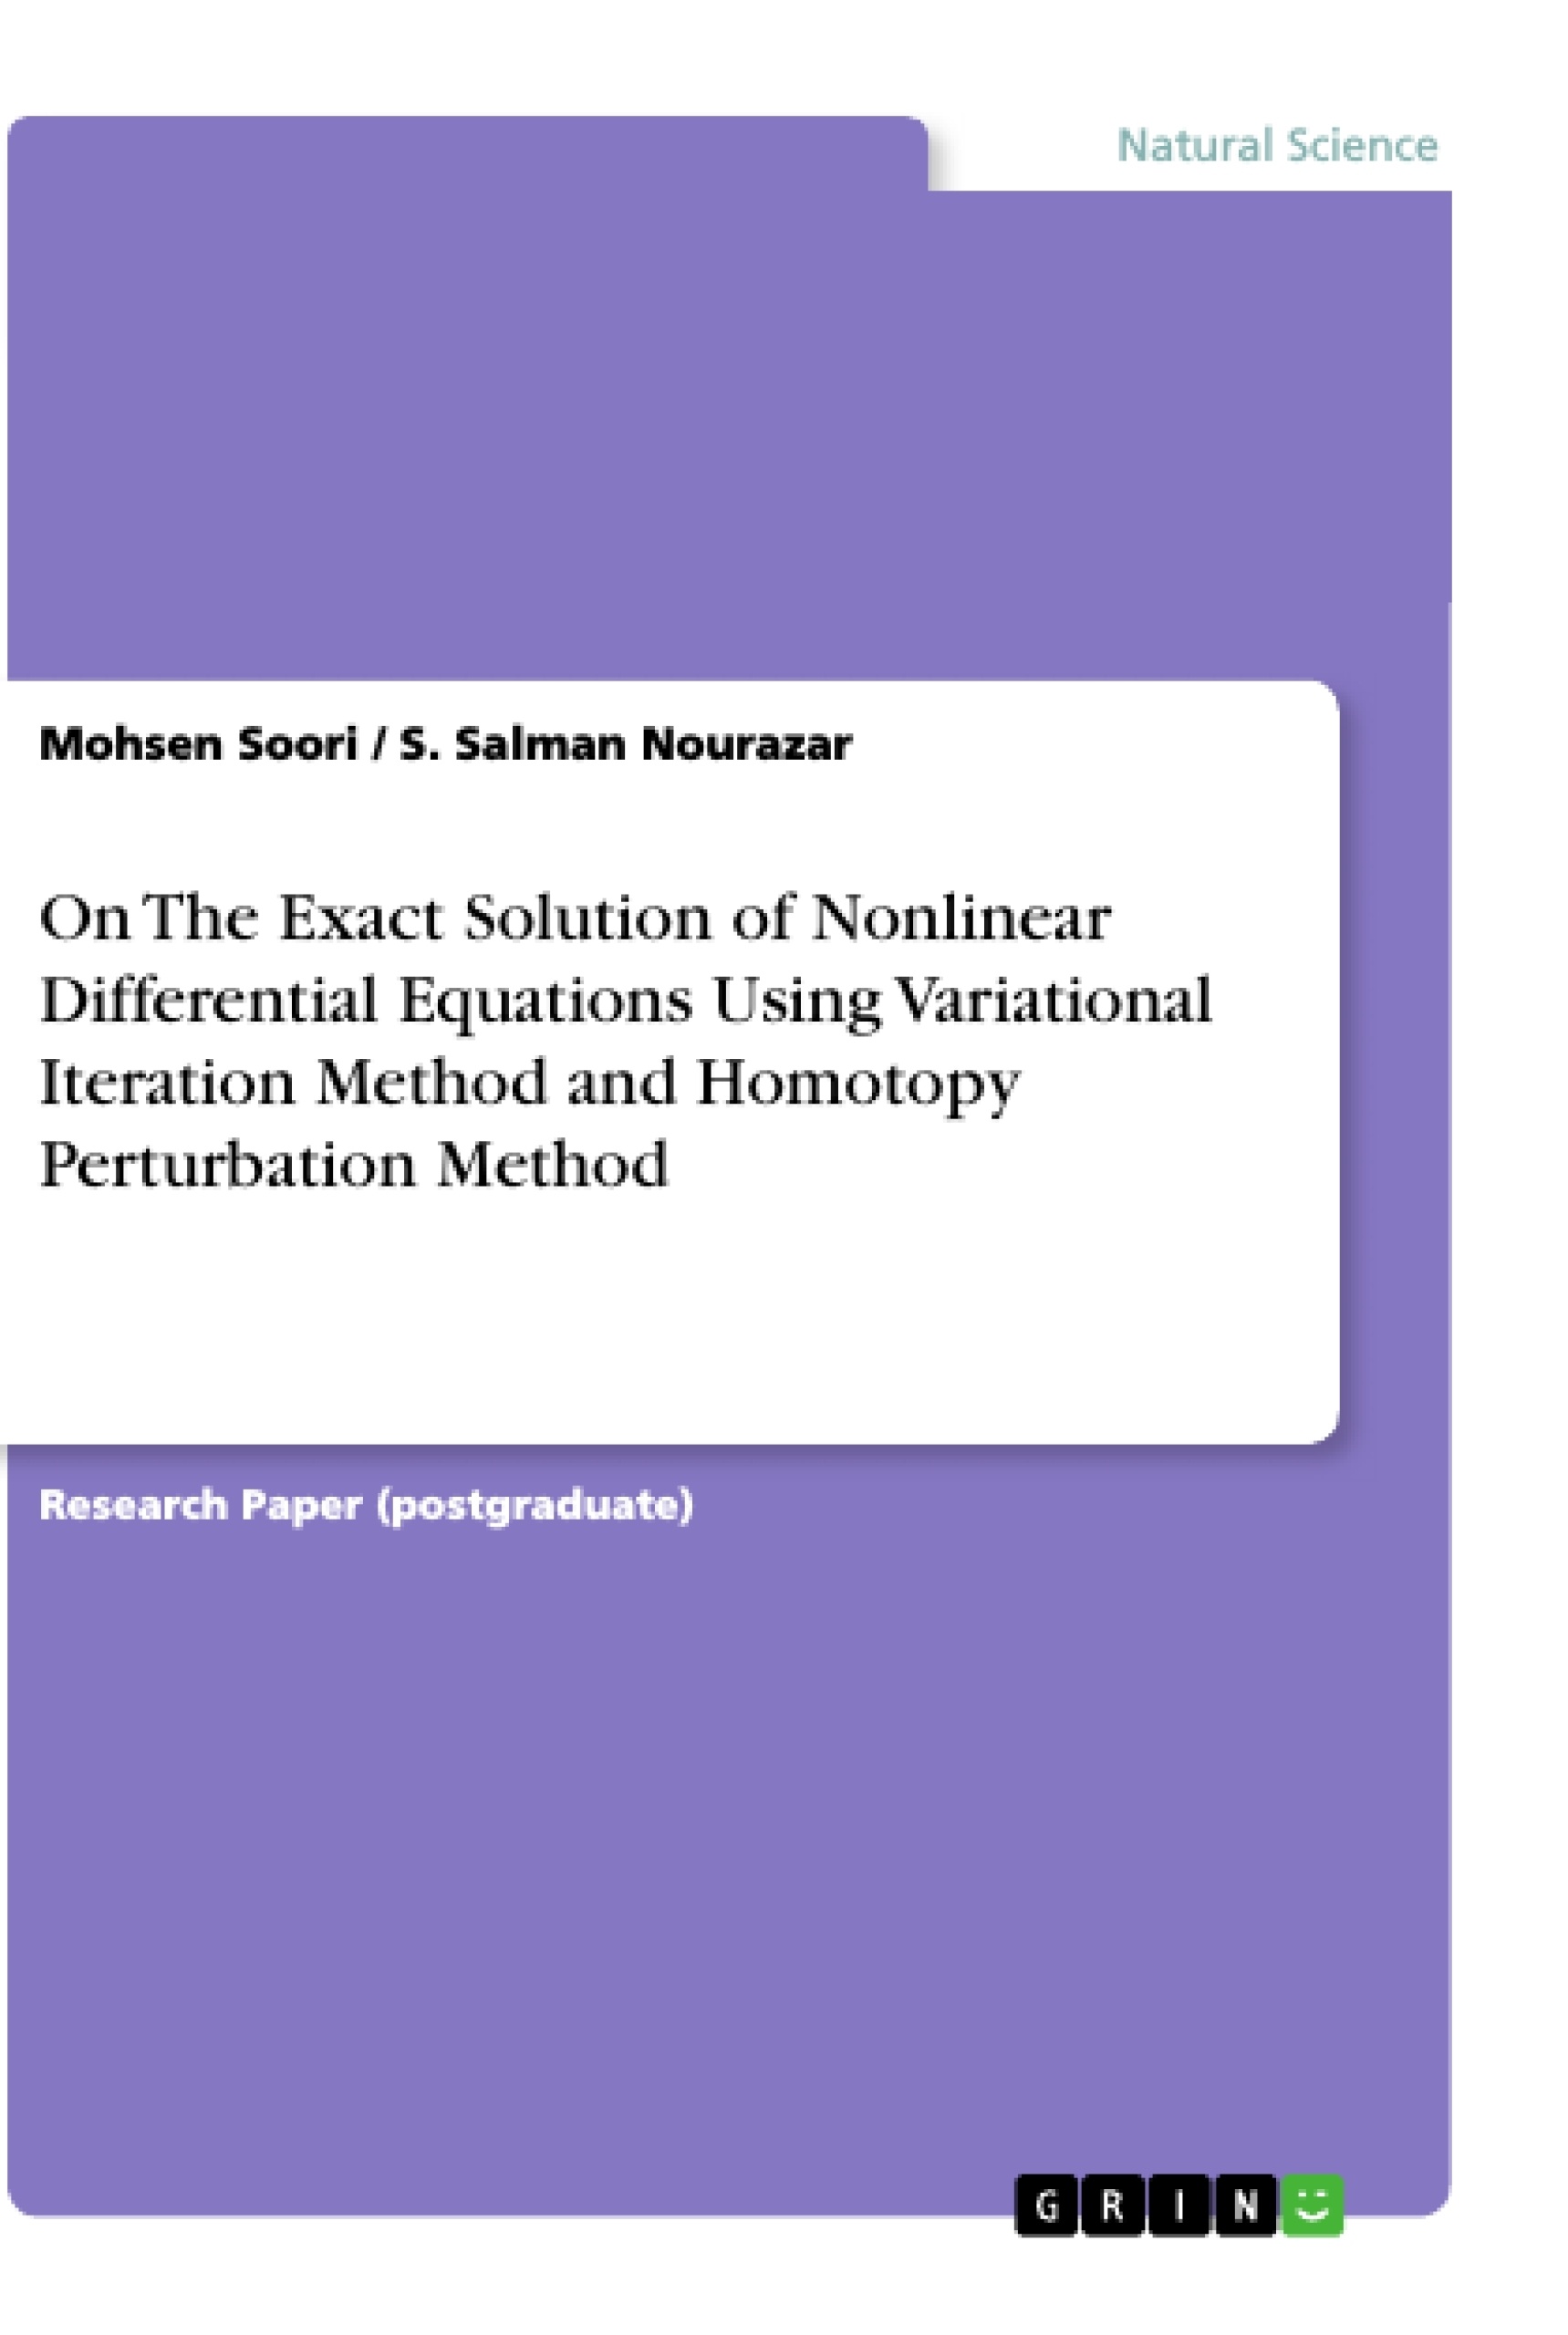 Titre: On The Exact Solution of Nonlinear Differential Equations Using Variational Iteration Method and Homotopy Perturbation Method